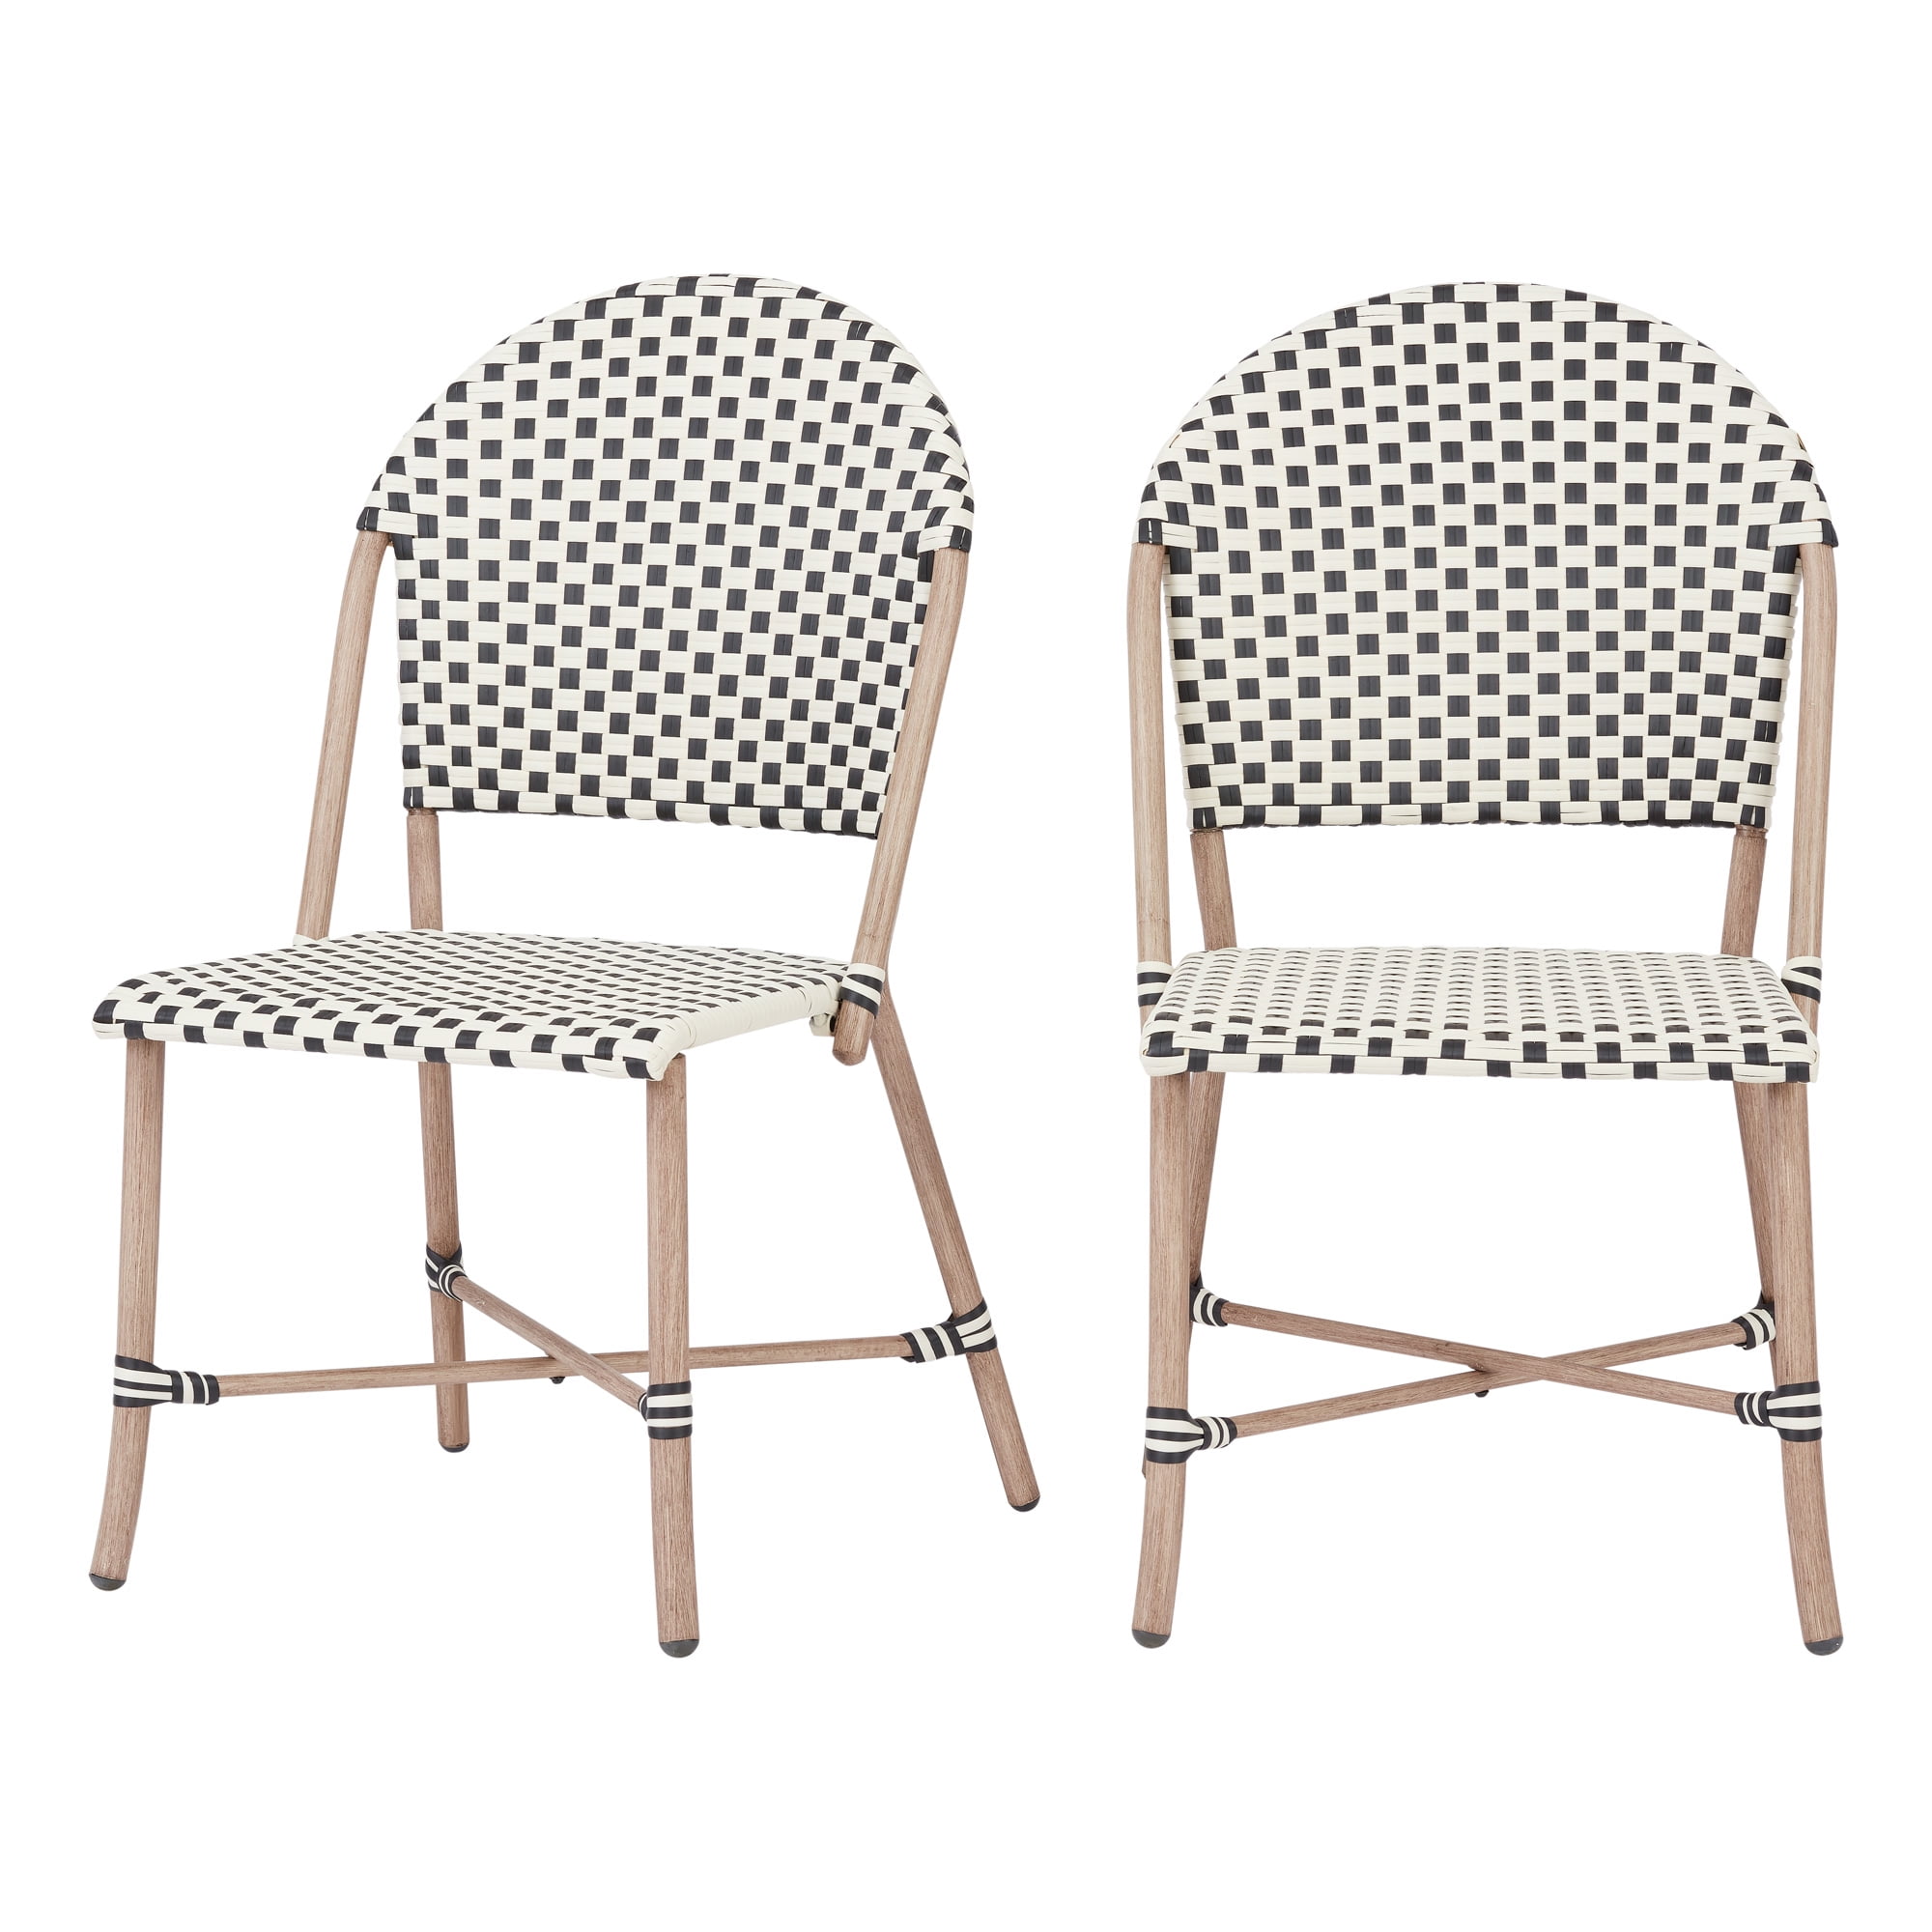 Better Homes & Gardens Parisian Steel Armless Chair, Black and White ...